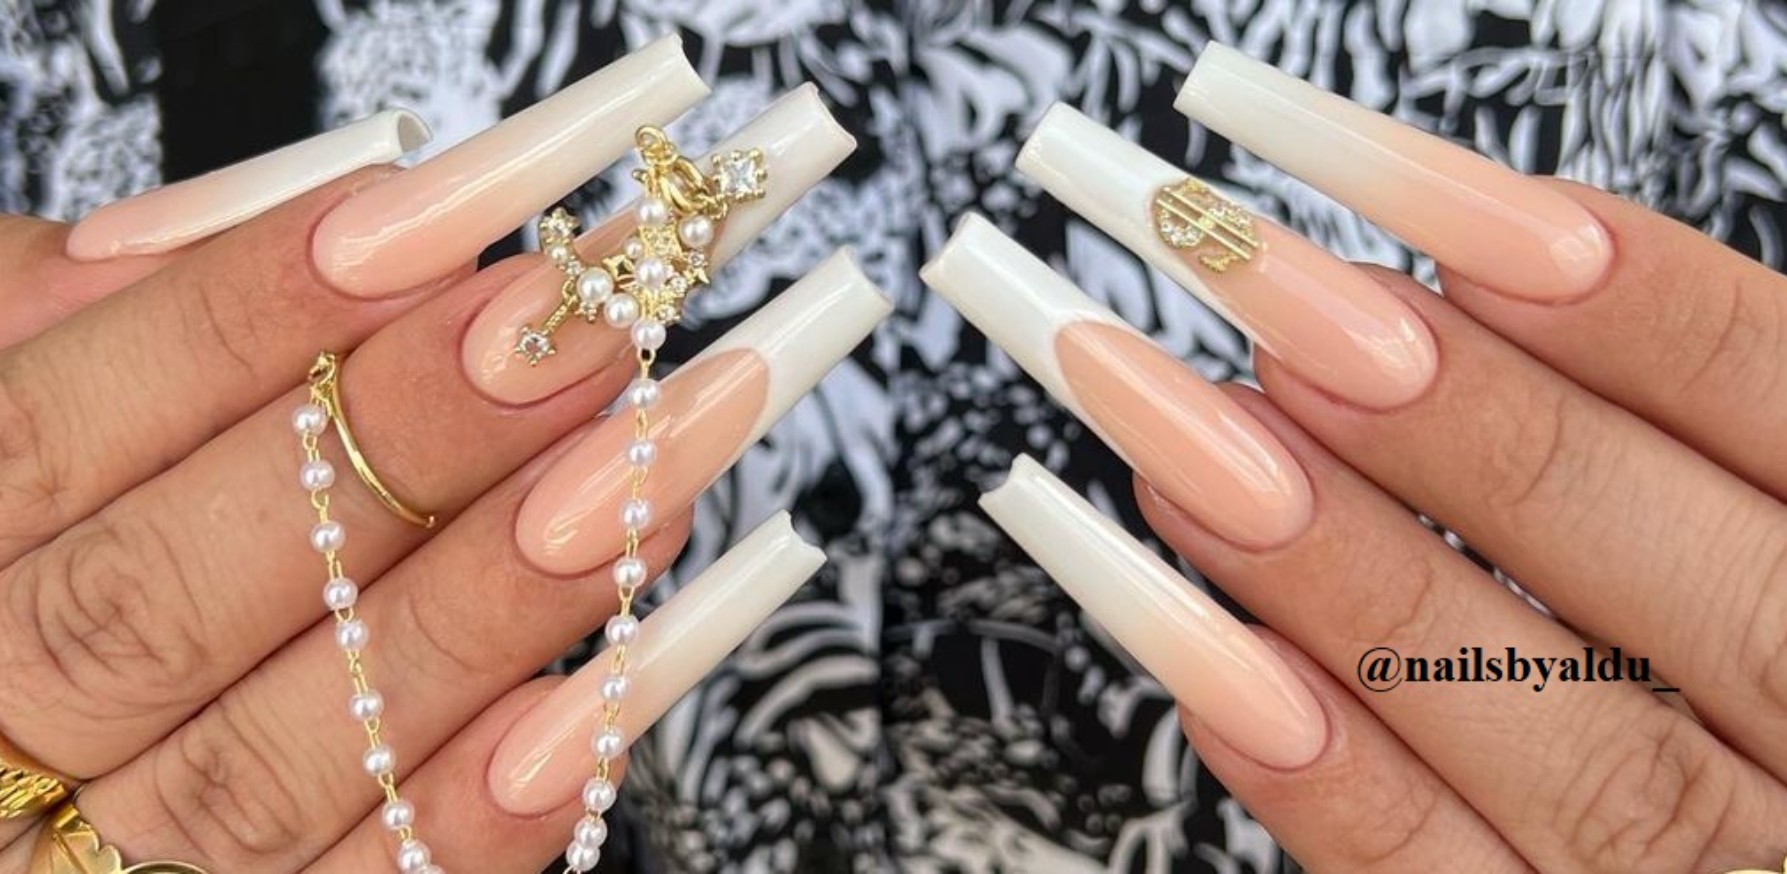 Coffin Nails Have The Potential That You Will Either Love Them Or Love Them